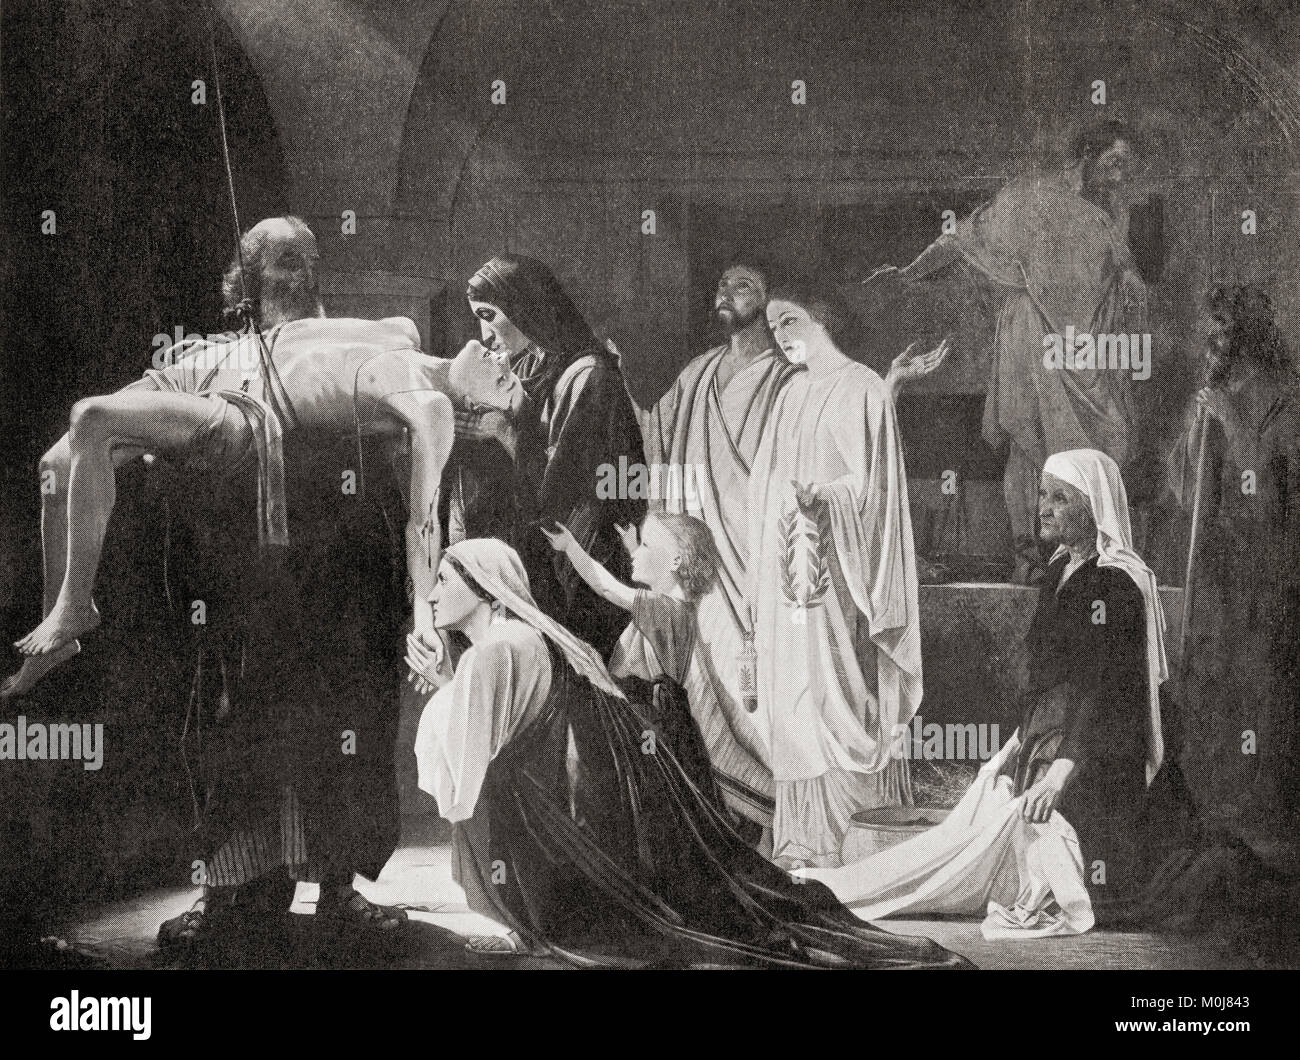 The burial of a Christian martyr in ancient Rome. Christians were the targets of persecution because of thier refusal to worship the Roman gods or to pay homage to the emperor as divine.   From Hutchinson's History of the Nations, published 1915. Stock Photo